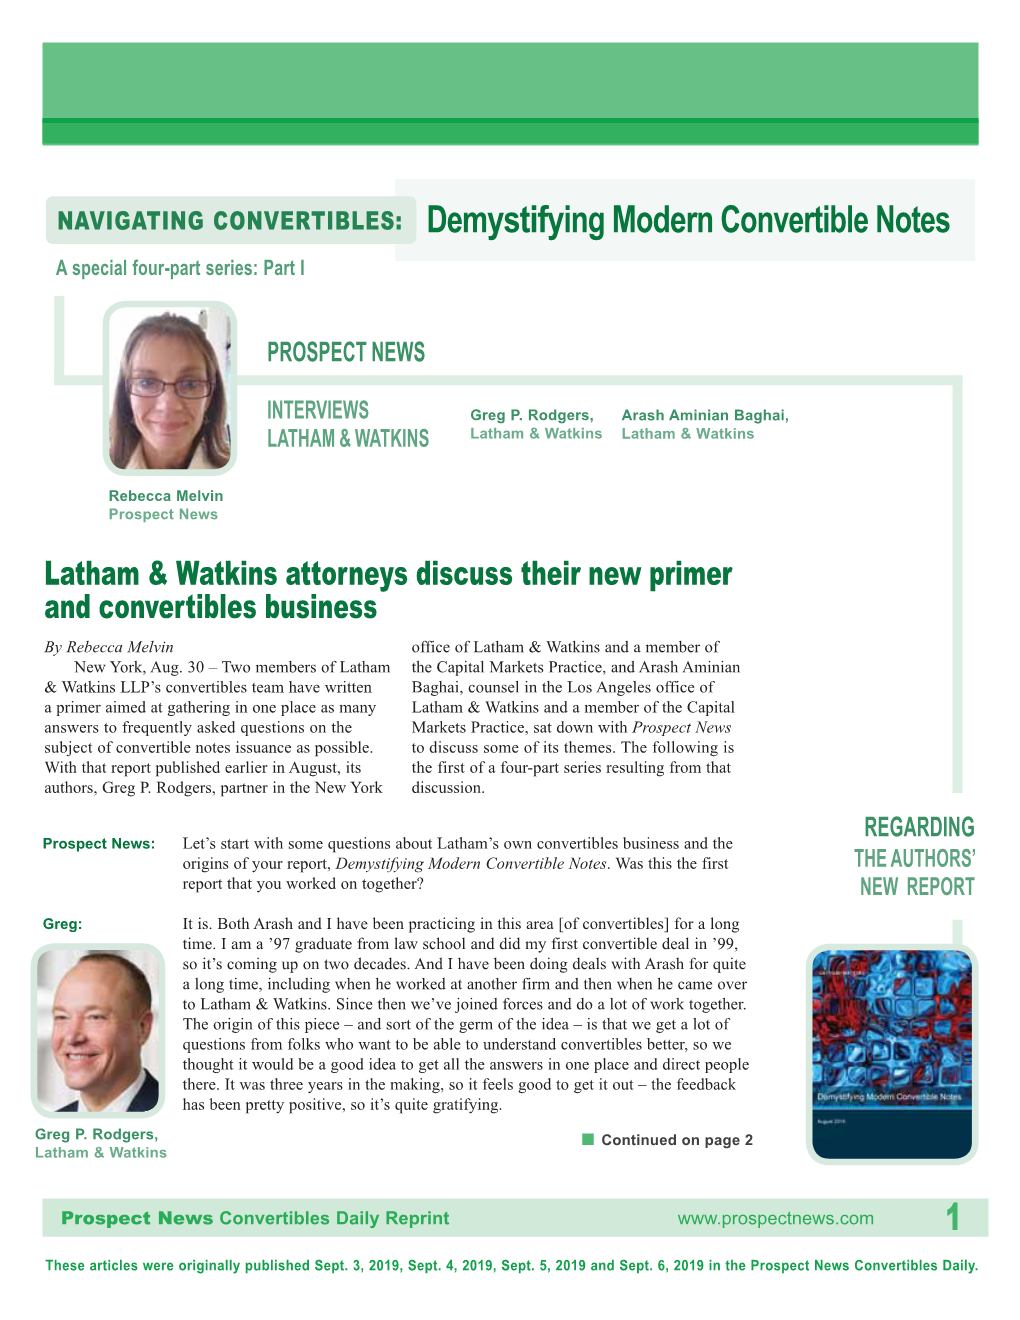 Demystifying Modern Convertible Notes a Special Four-Part Series: Part I